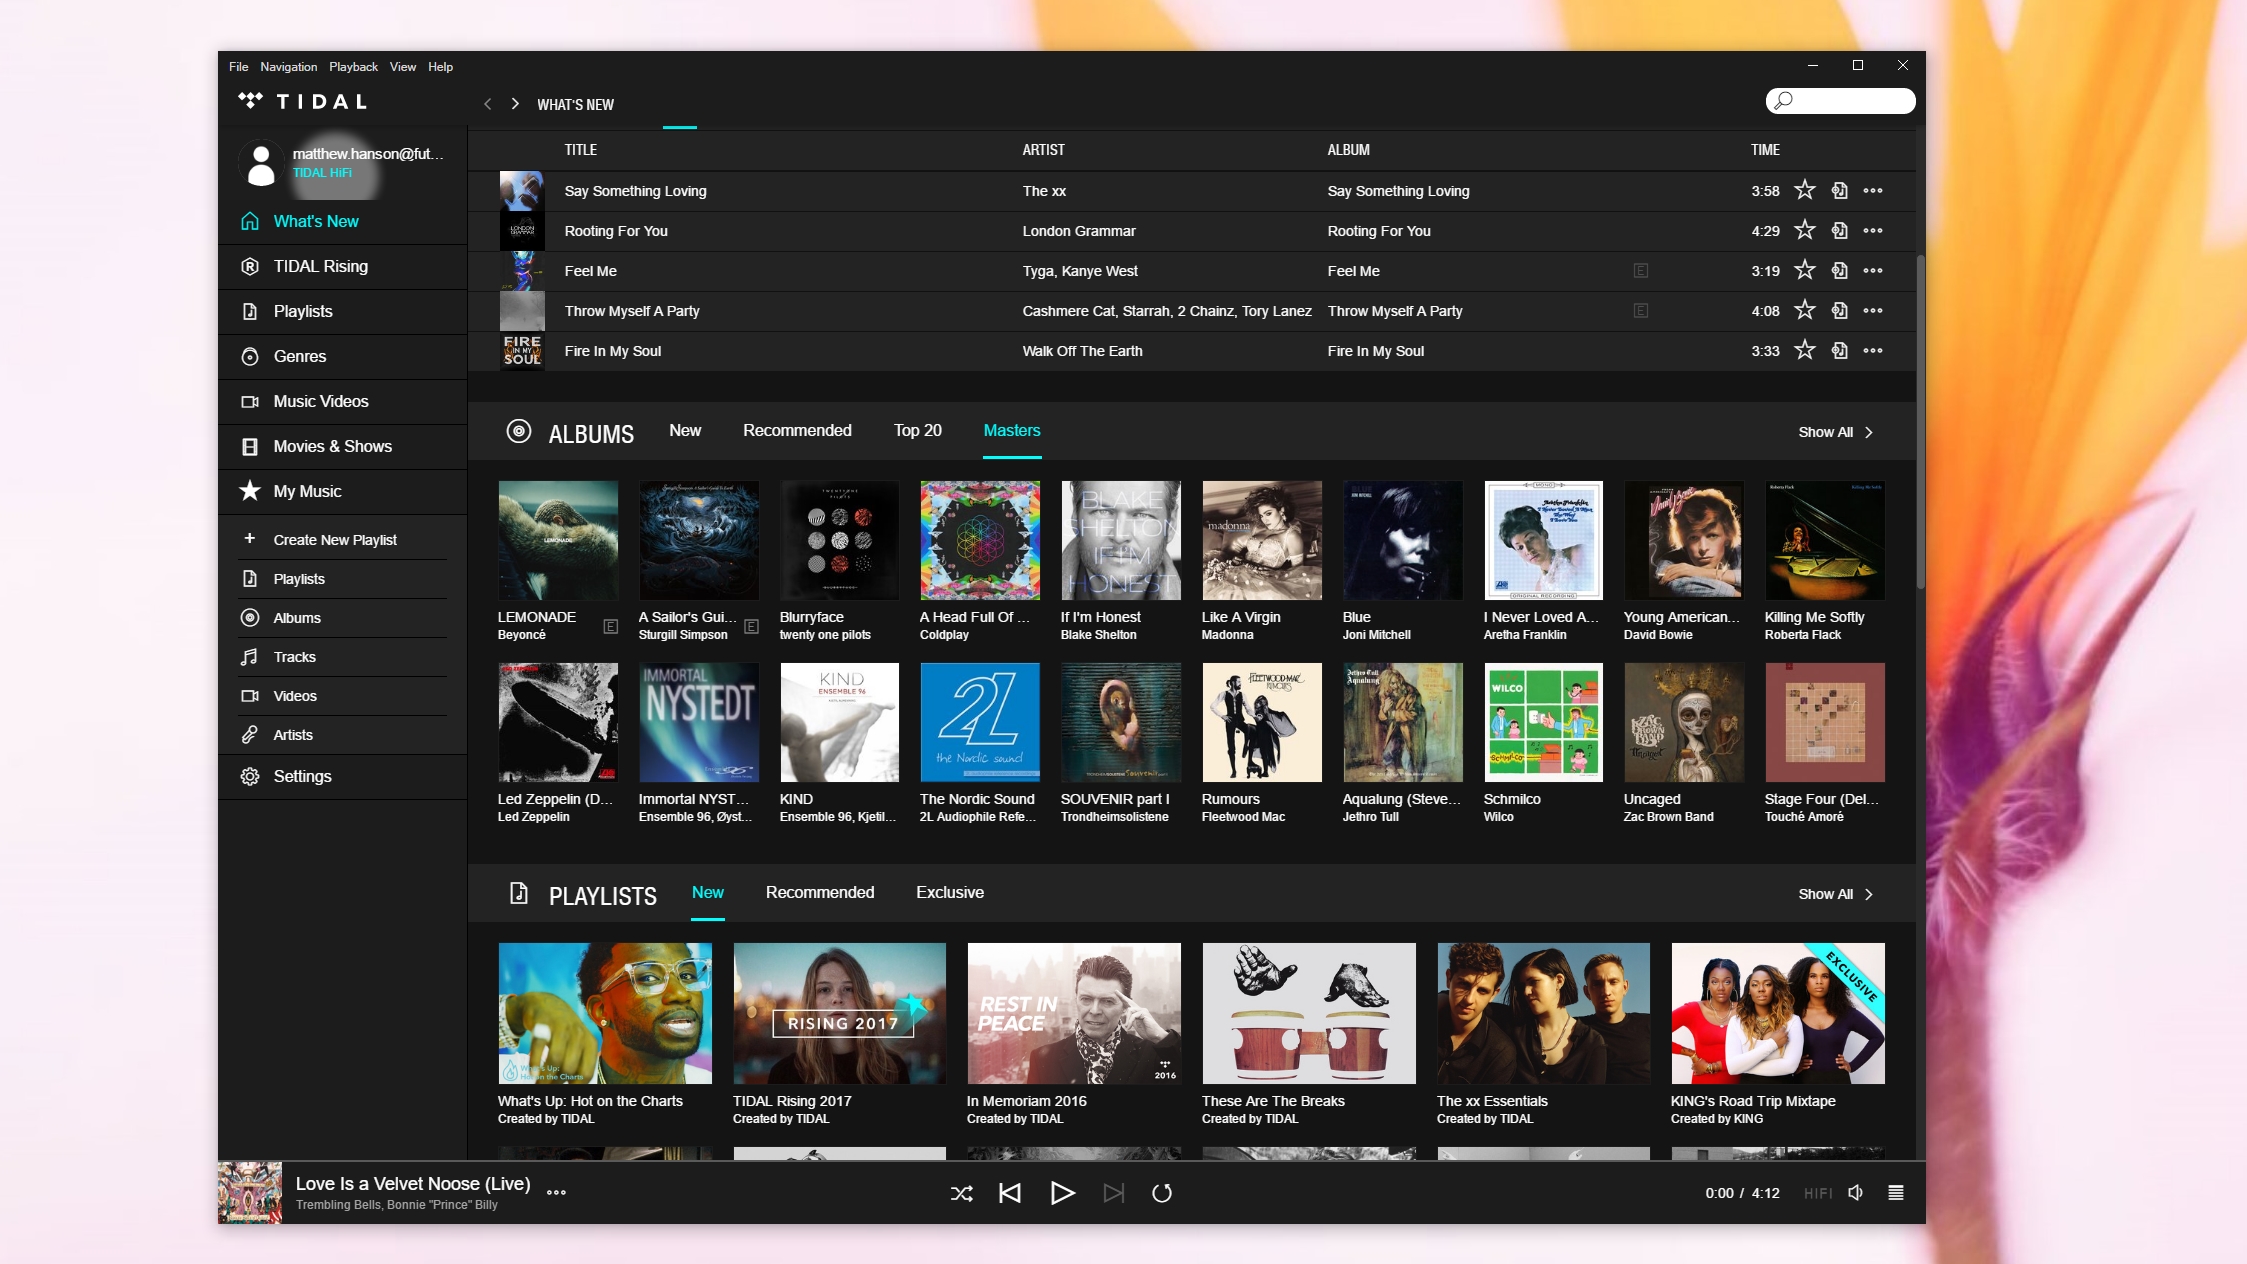 Tidal (above) uses a similar Tile-based interface to Spotify.